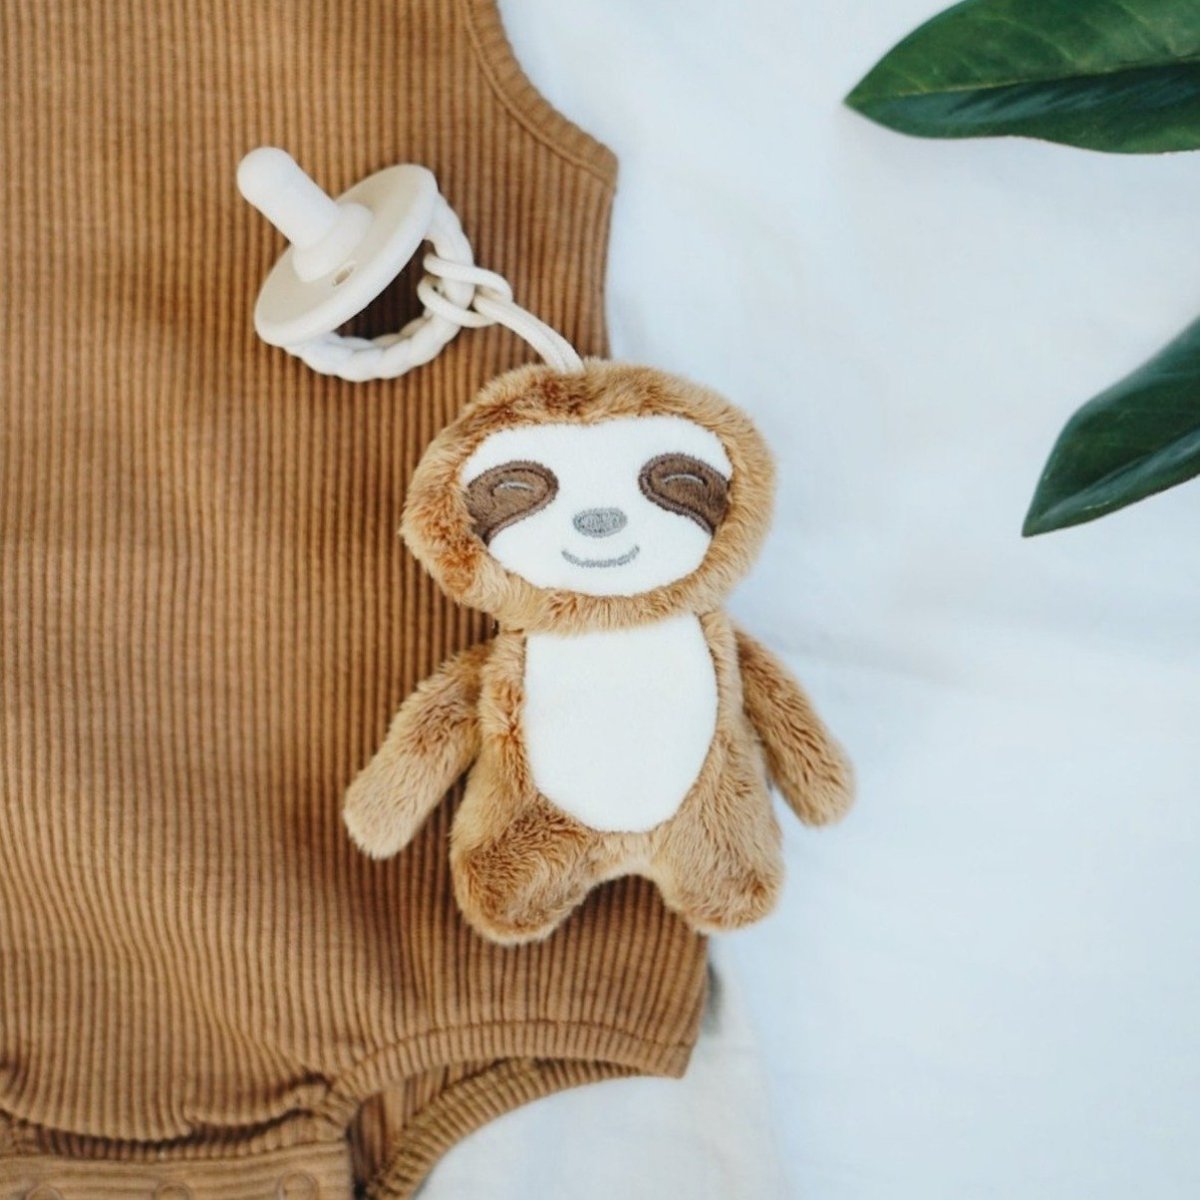 Sweetie Pal Plush & Pacifier - Sloth | Itzy Ritzy | Baby Essentials - Bee Like Kids